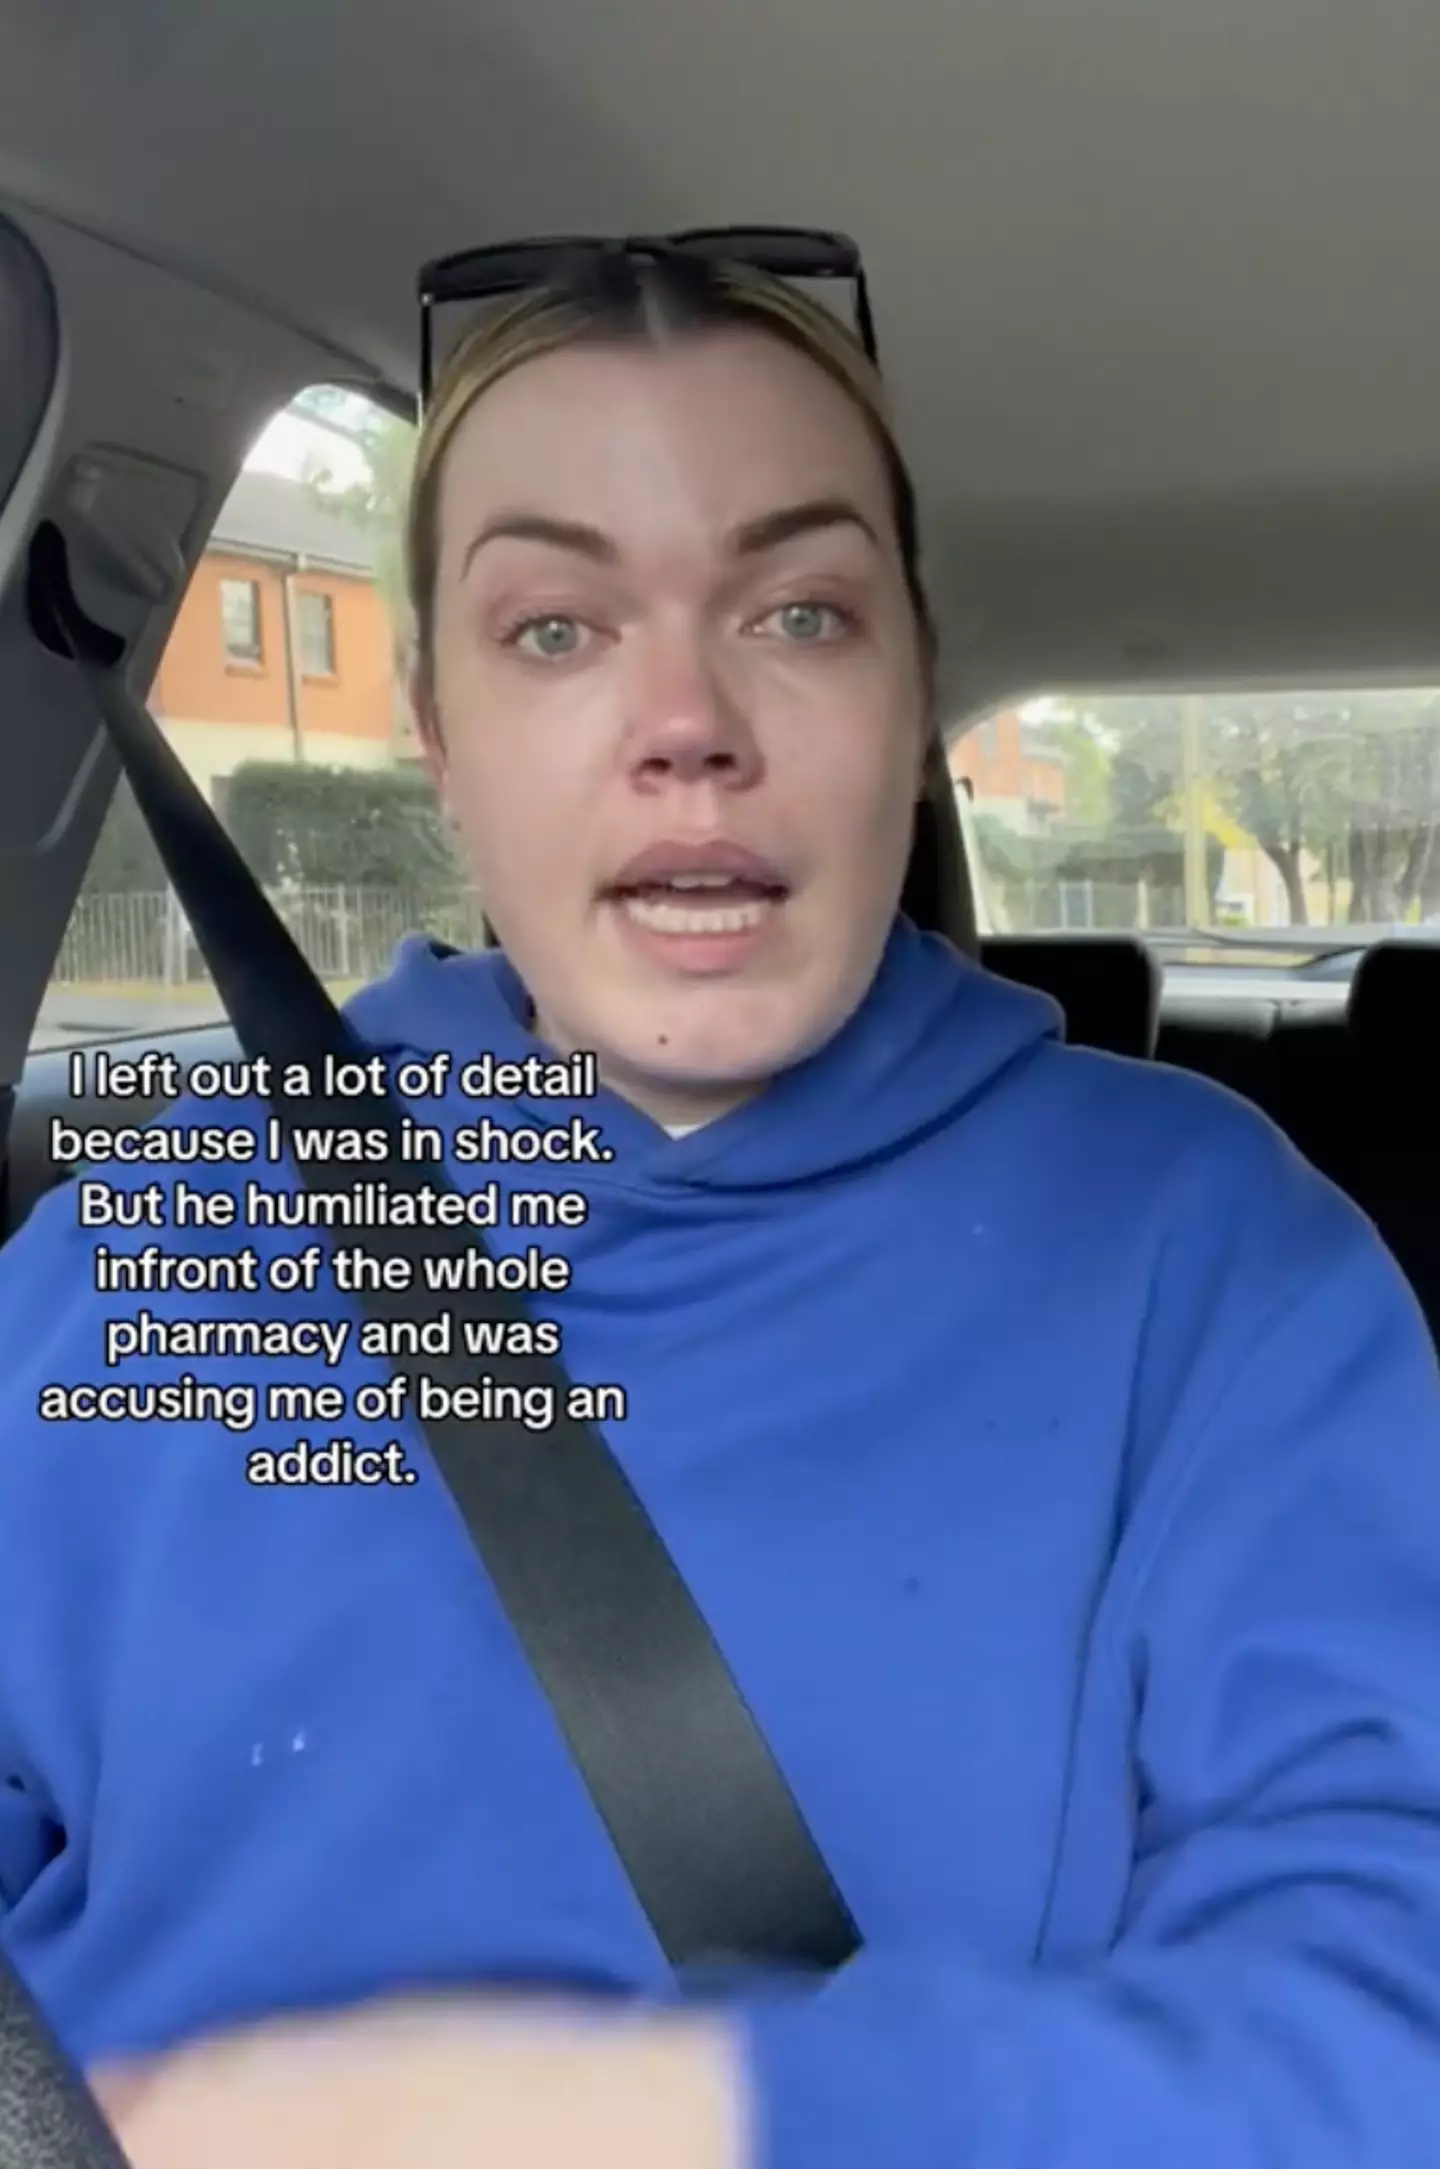 Anna says the worker 'was accusing [her] of being an addict'.